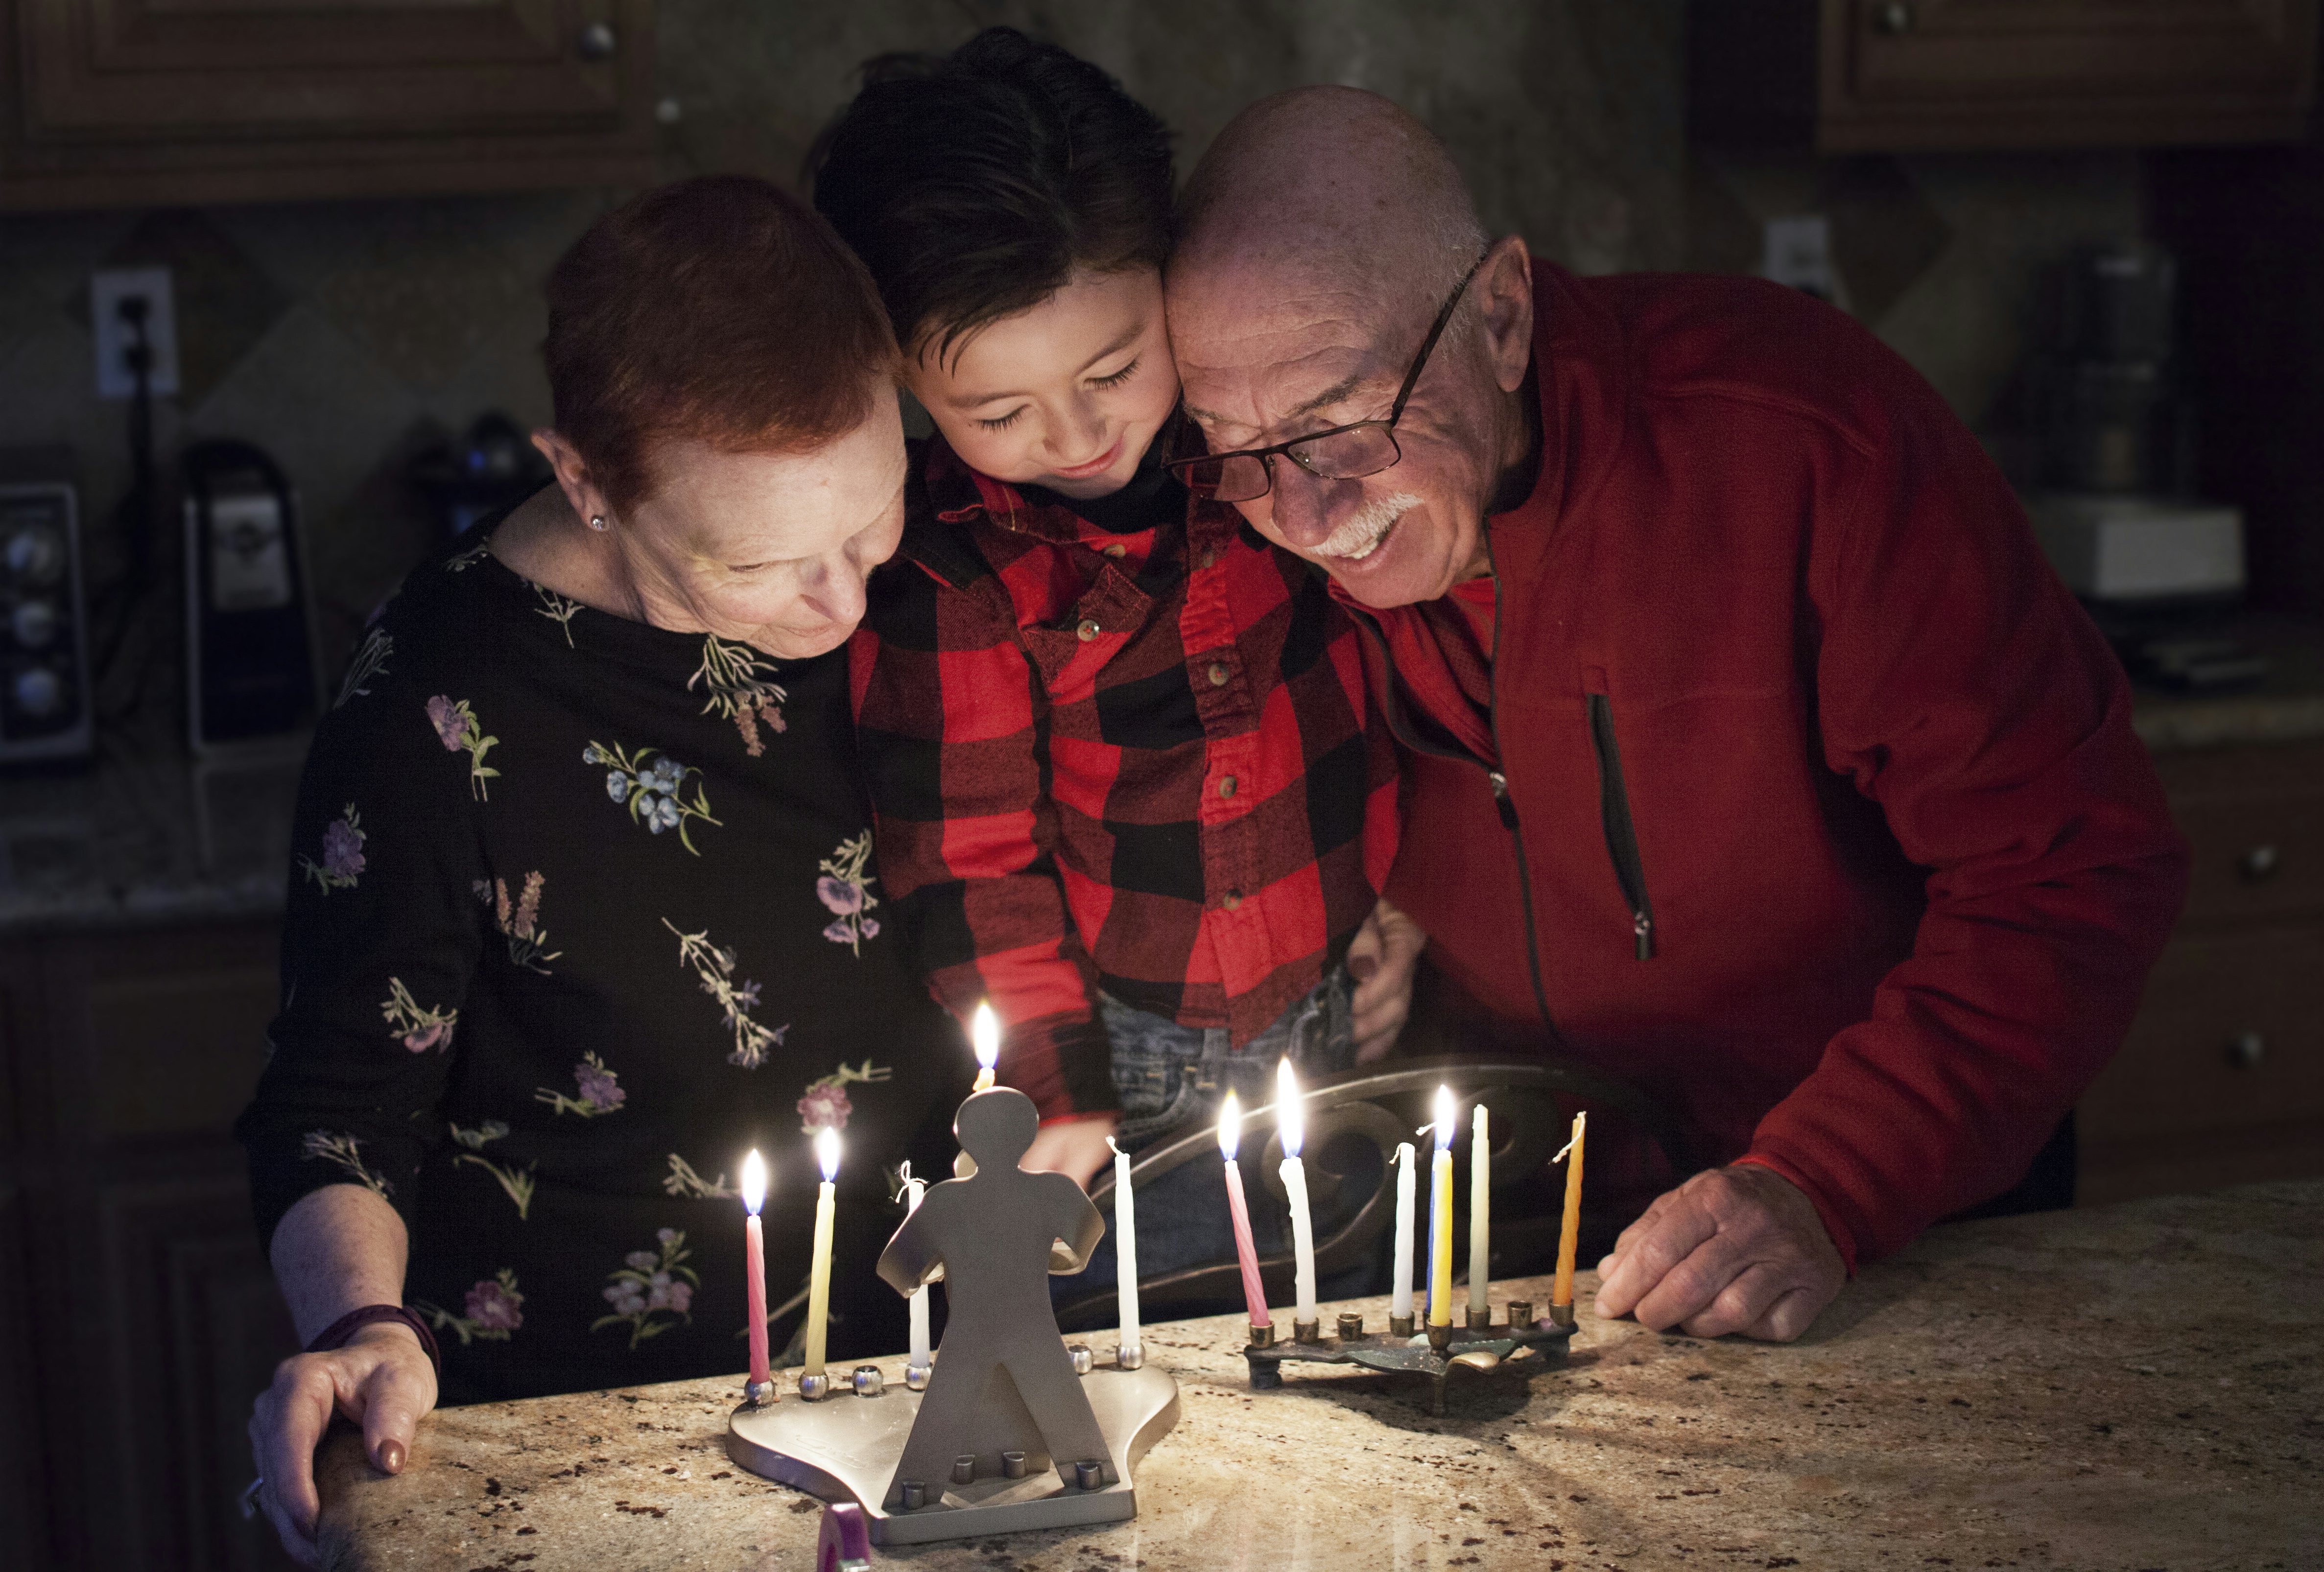 10 Hanukkah Quotes That Celebrate The Hope Humor Of The Holiday Jewish people are adapting their holiday celebrations this year with virtual menorah lightings and online latke classes. https www romper com p 10 hanukkah quotes that celebrate the hope humor of the holiday 19495650